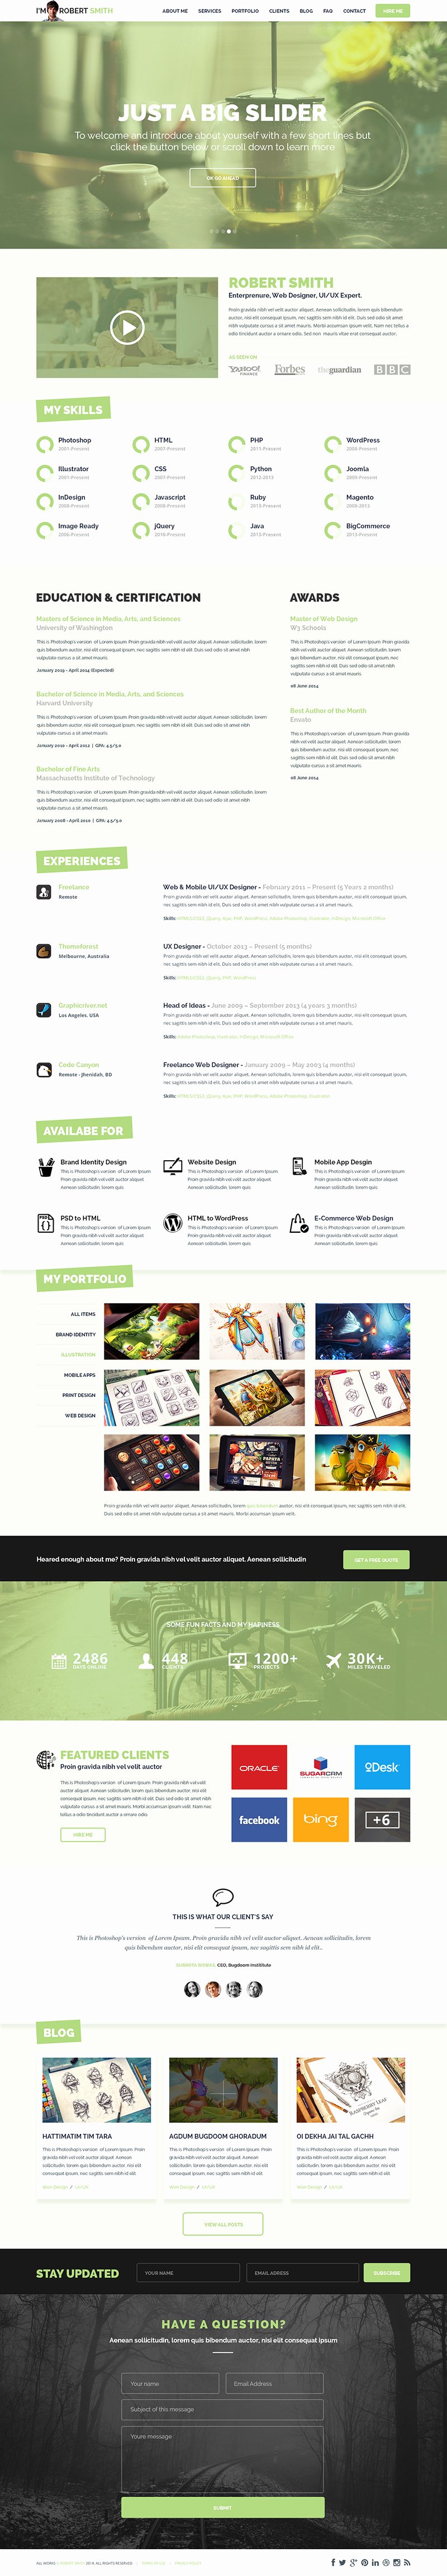 Resume Website Template Free Unique 5 Free Extremely Professional Resume Templates Collection